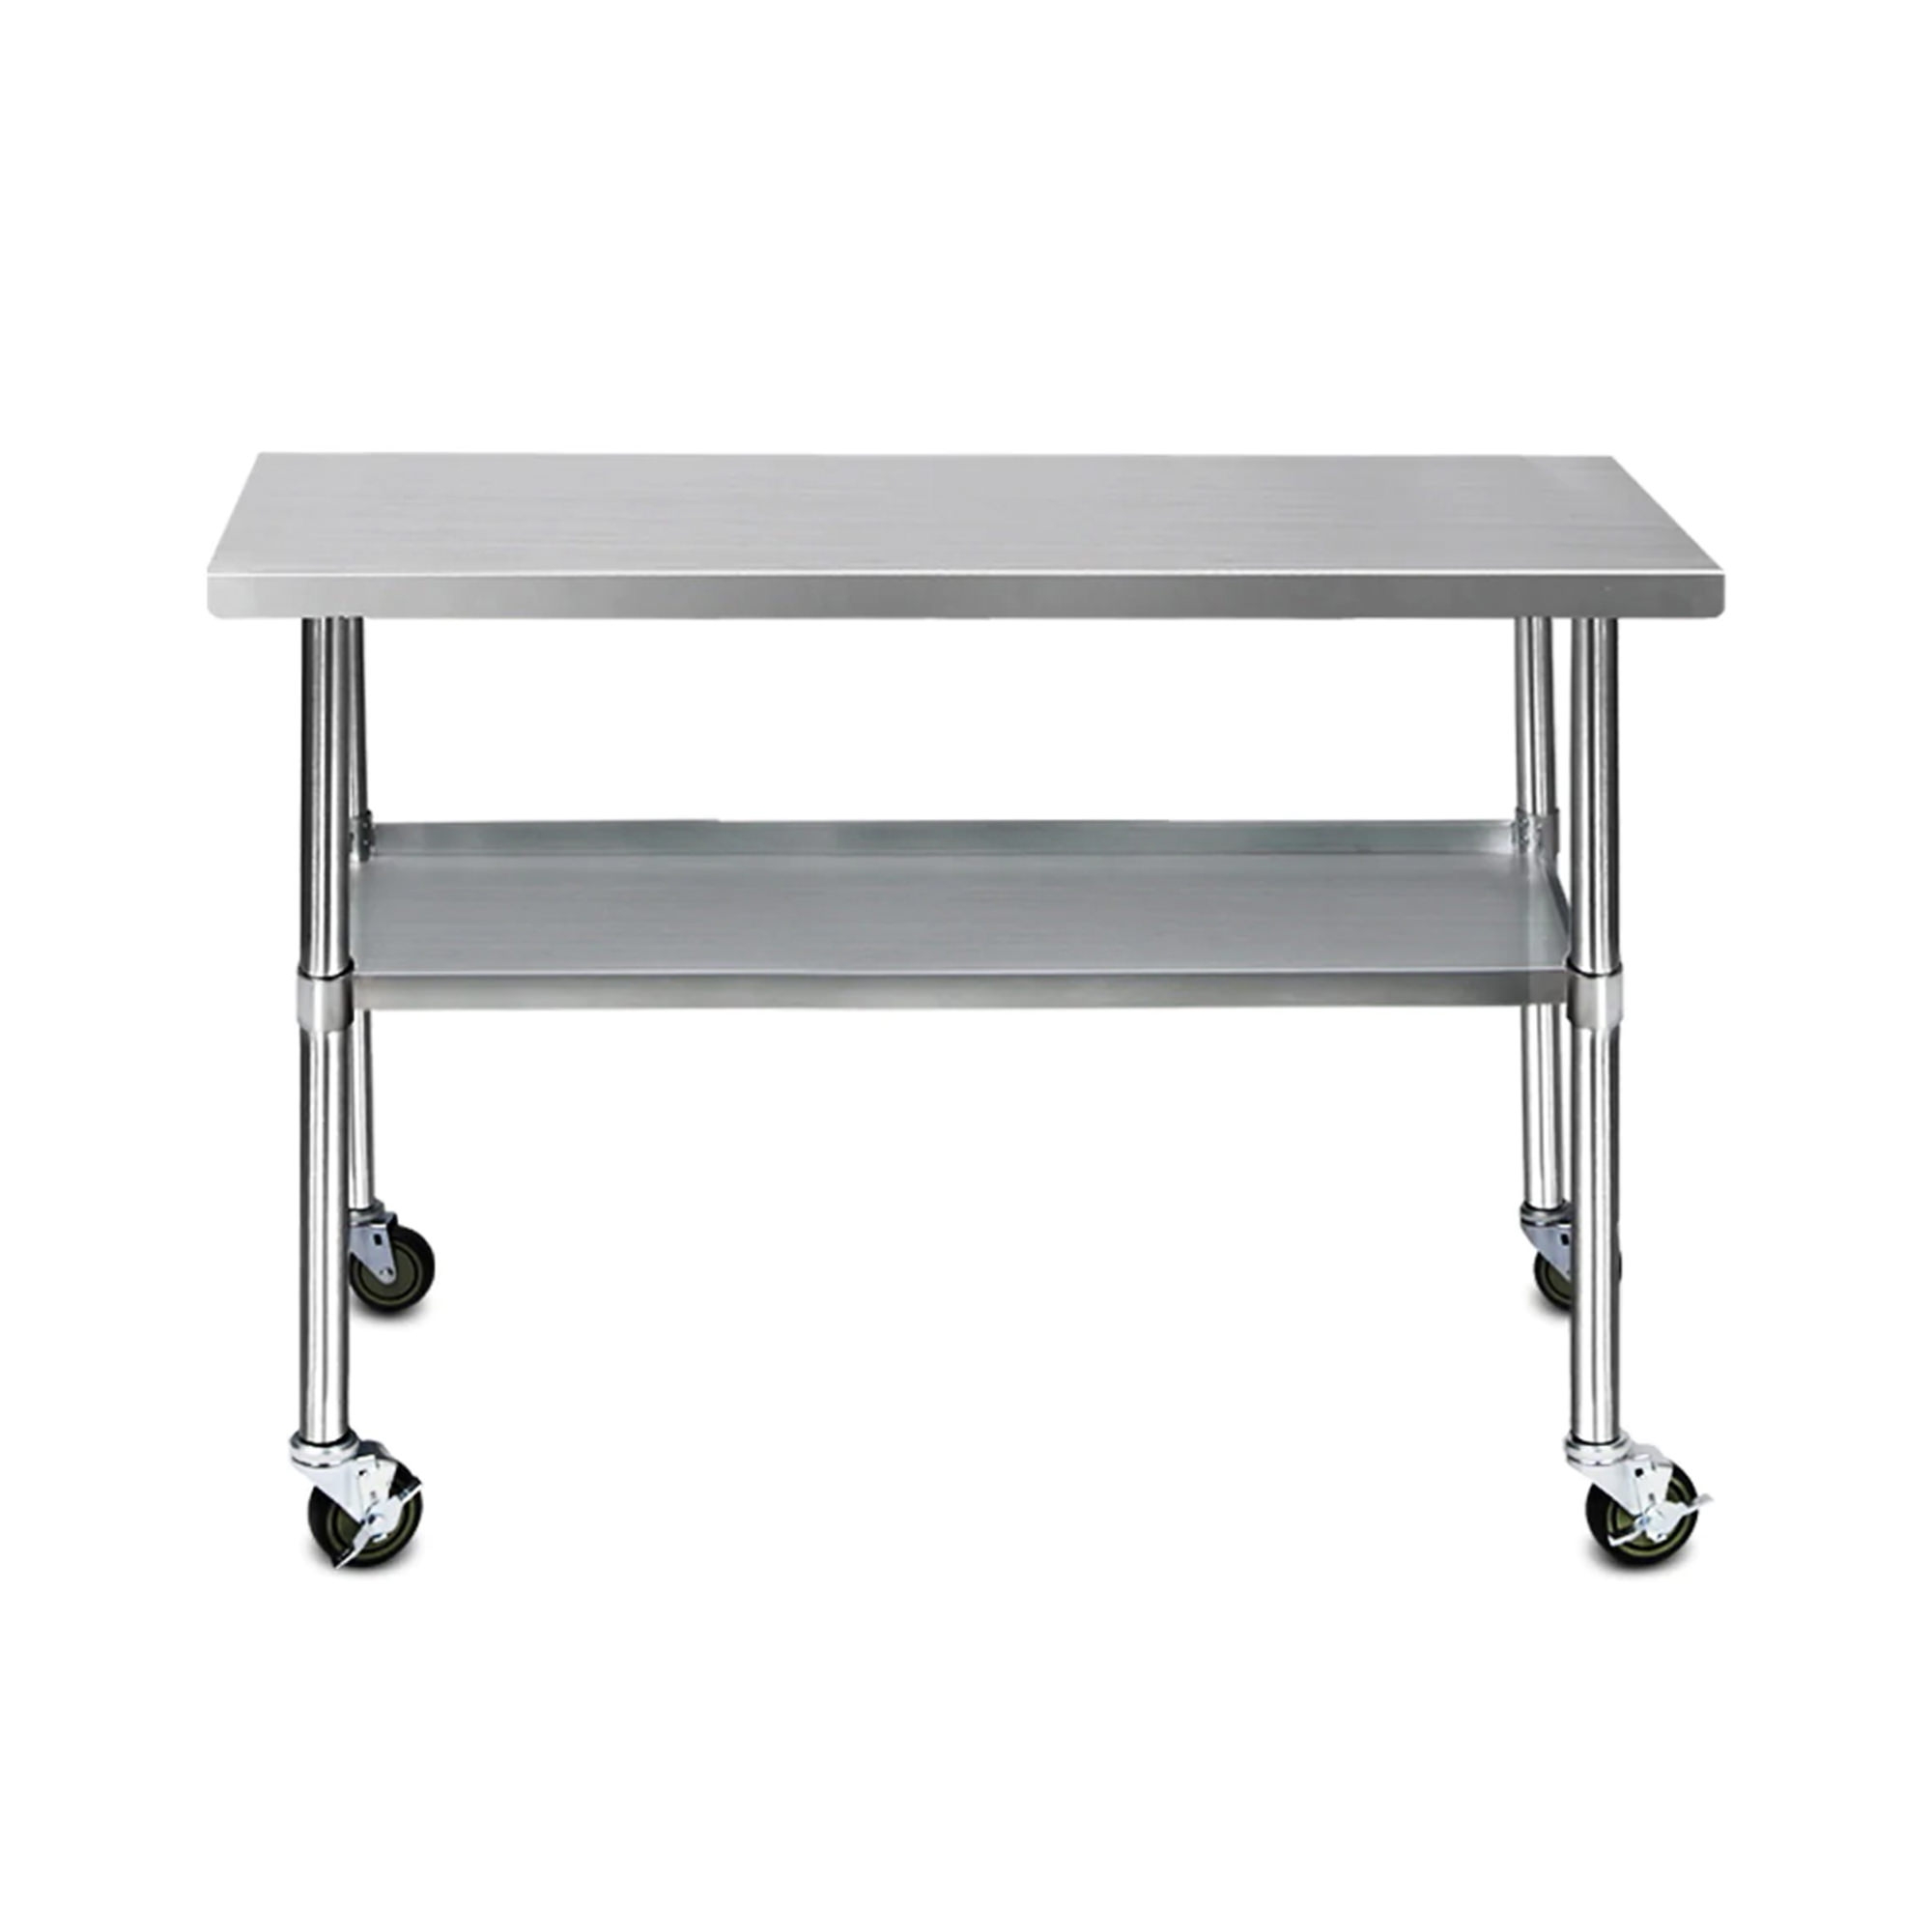 Cefito 304 Stainless Steel Kitchen Bench with Wheels 121.9x61cm Image 2